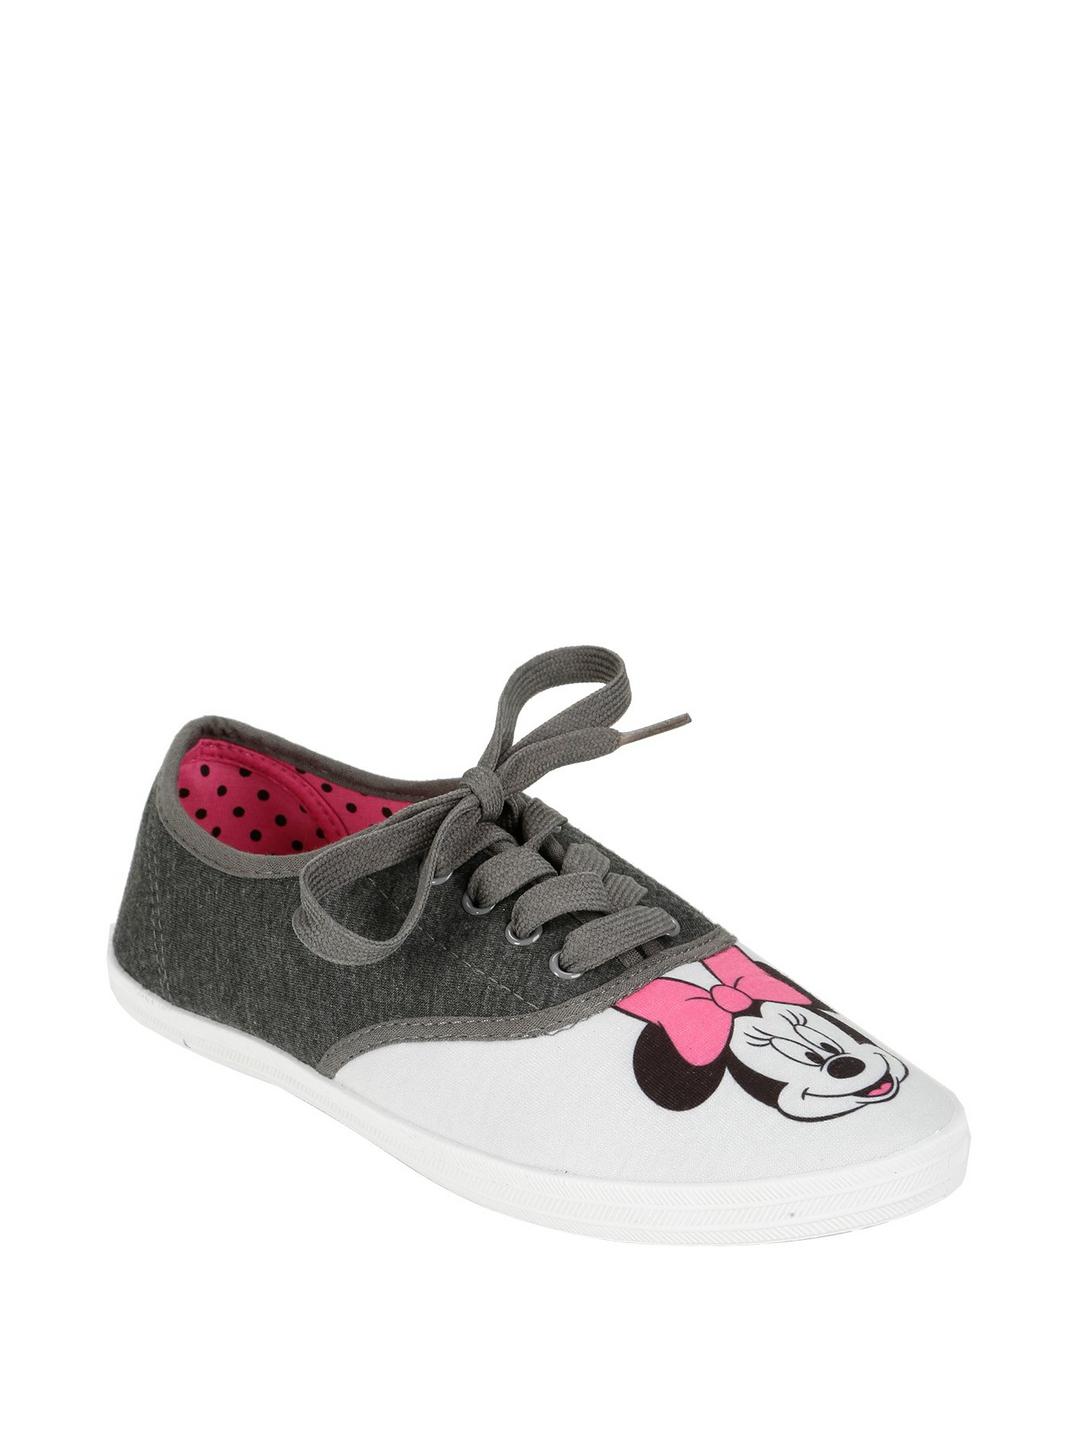 Disney Minnie Mouse Face Lace-Up Sneakers, GREY, hi-res